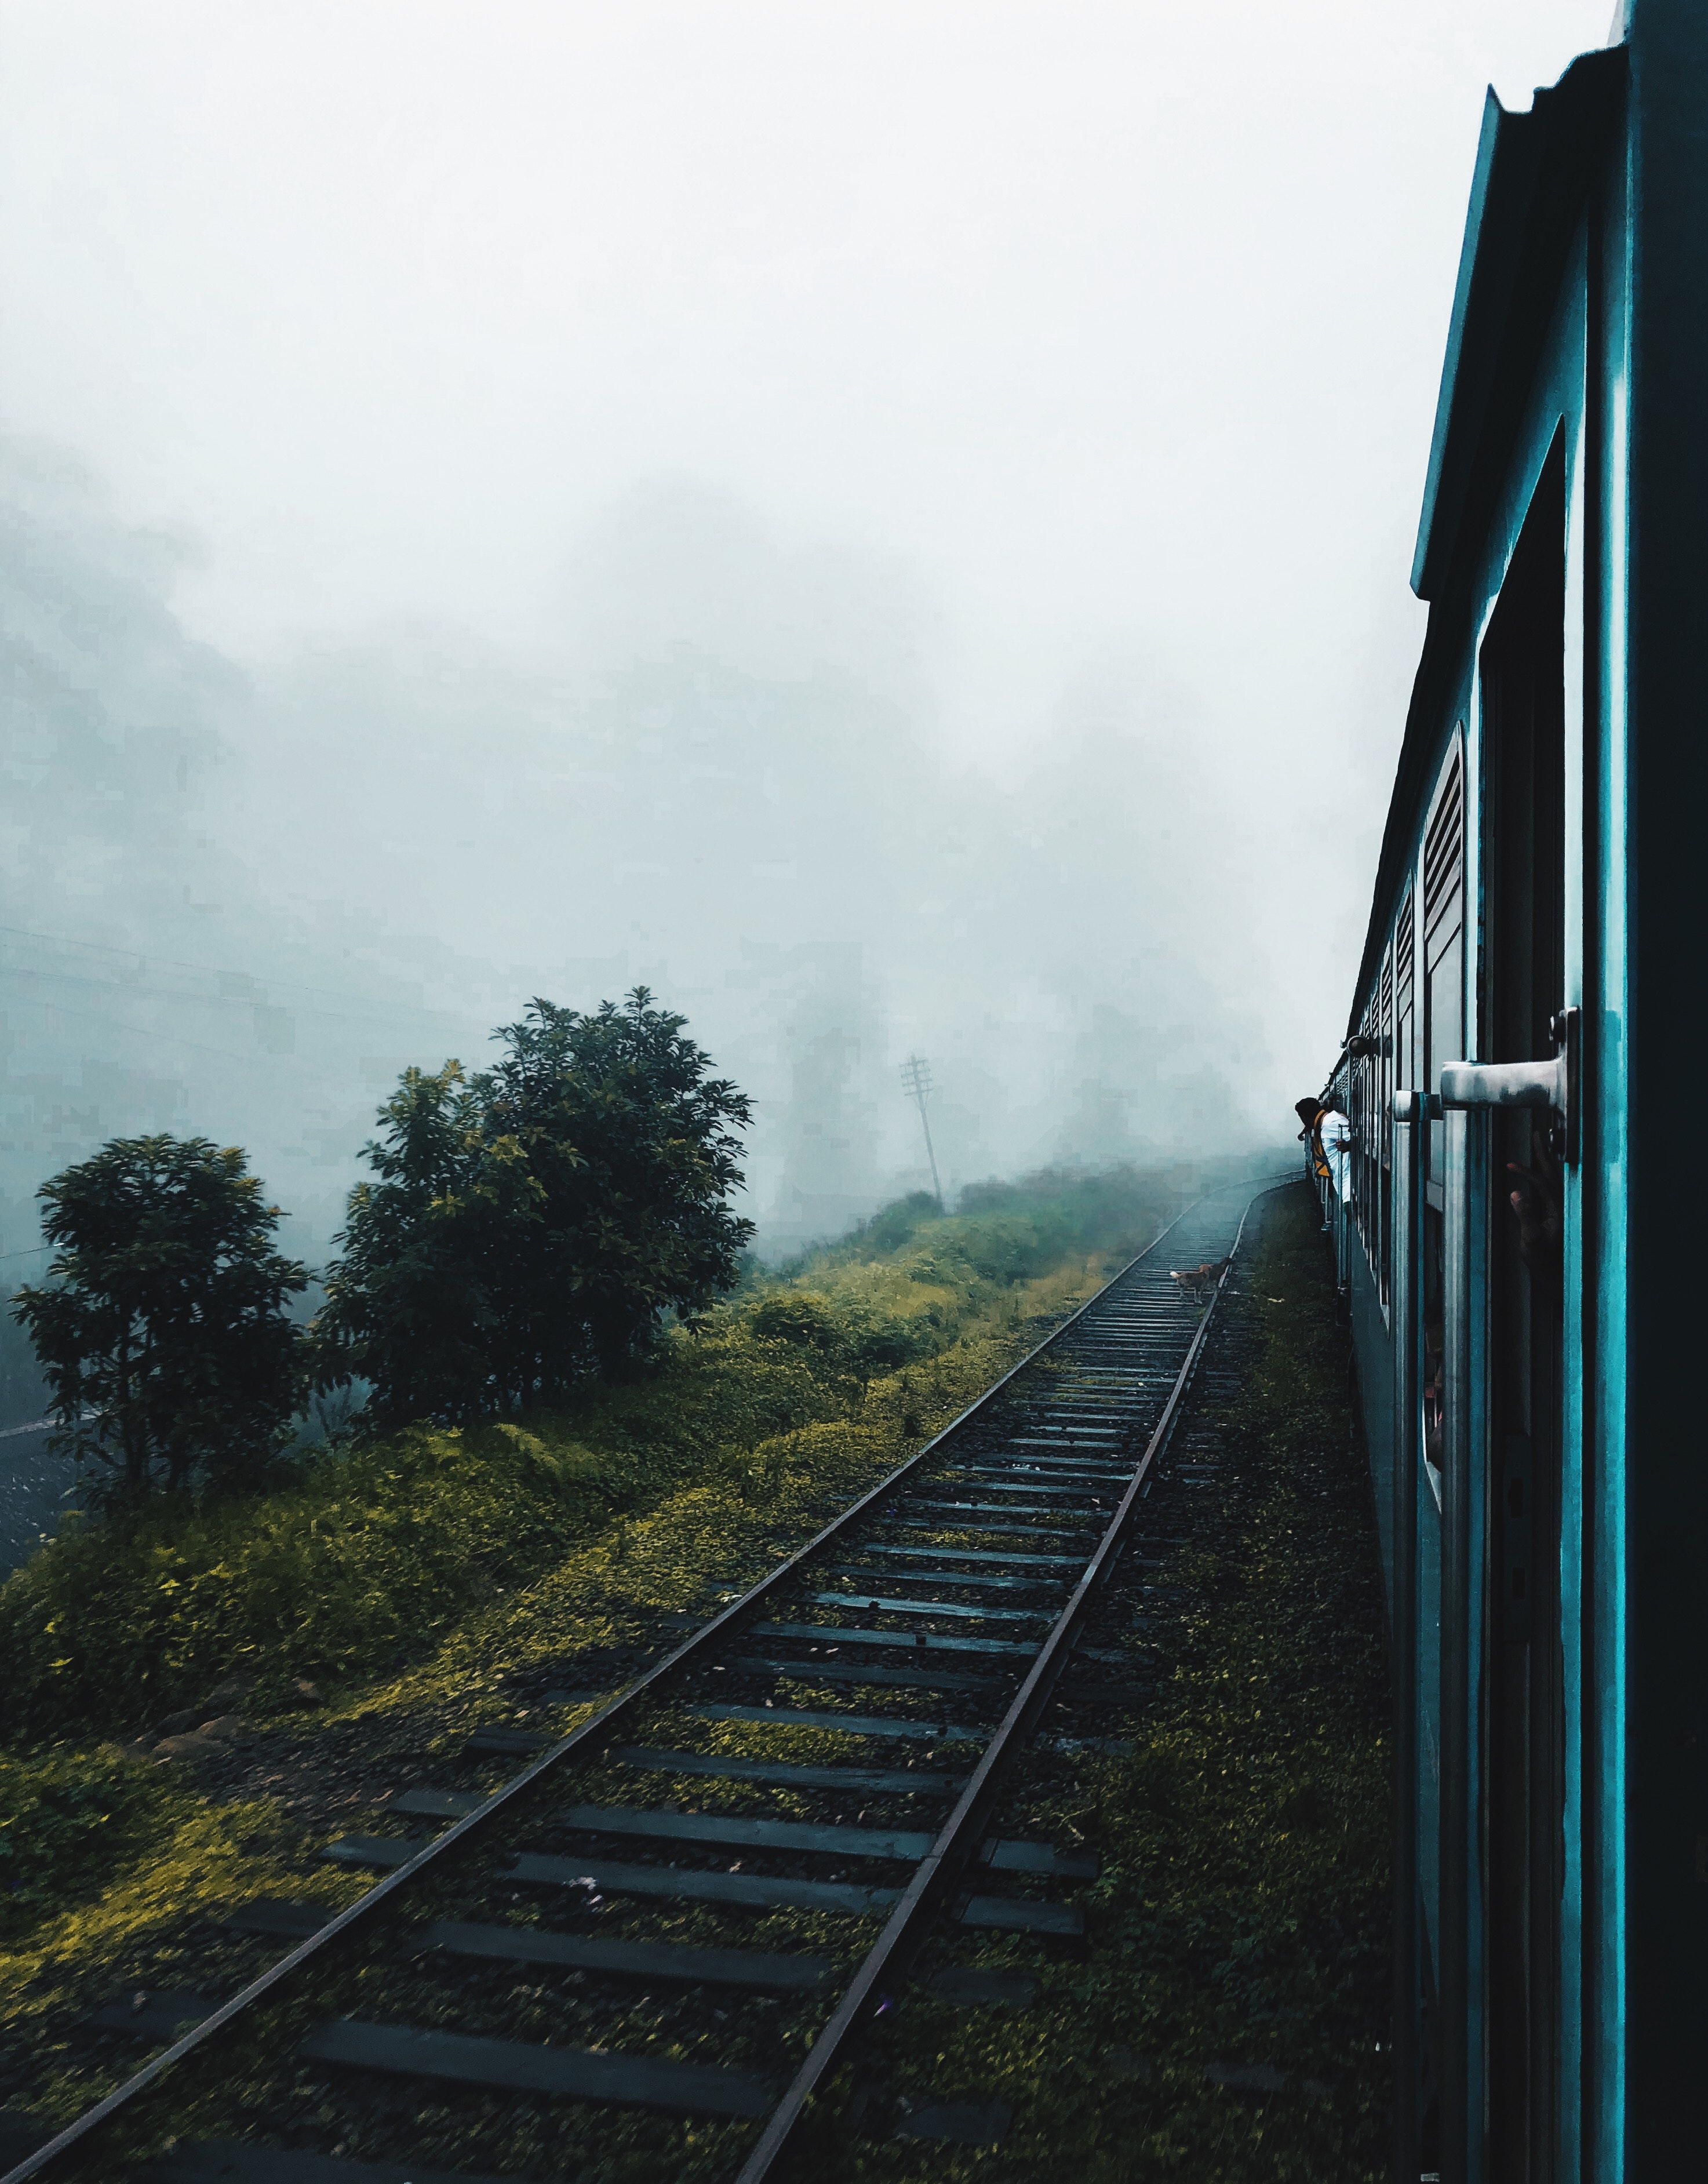 Train Wallpapers